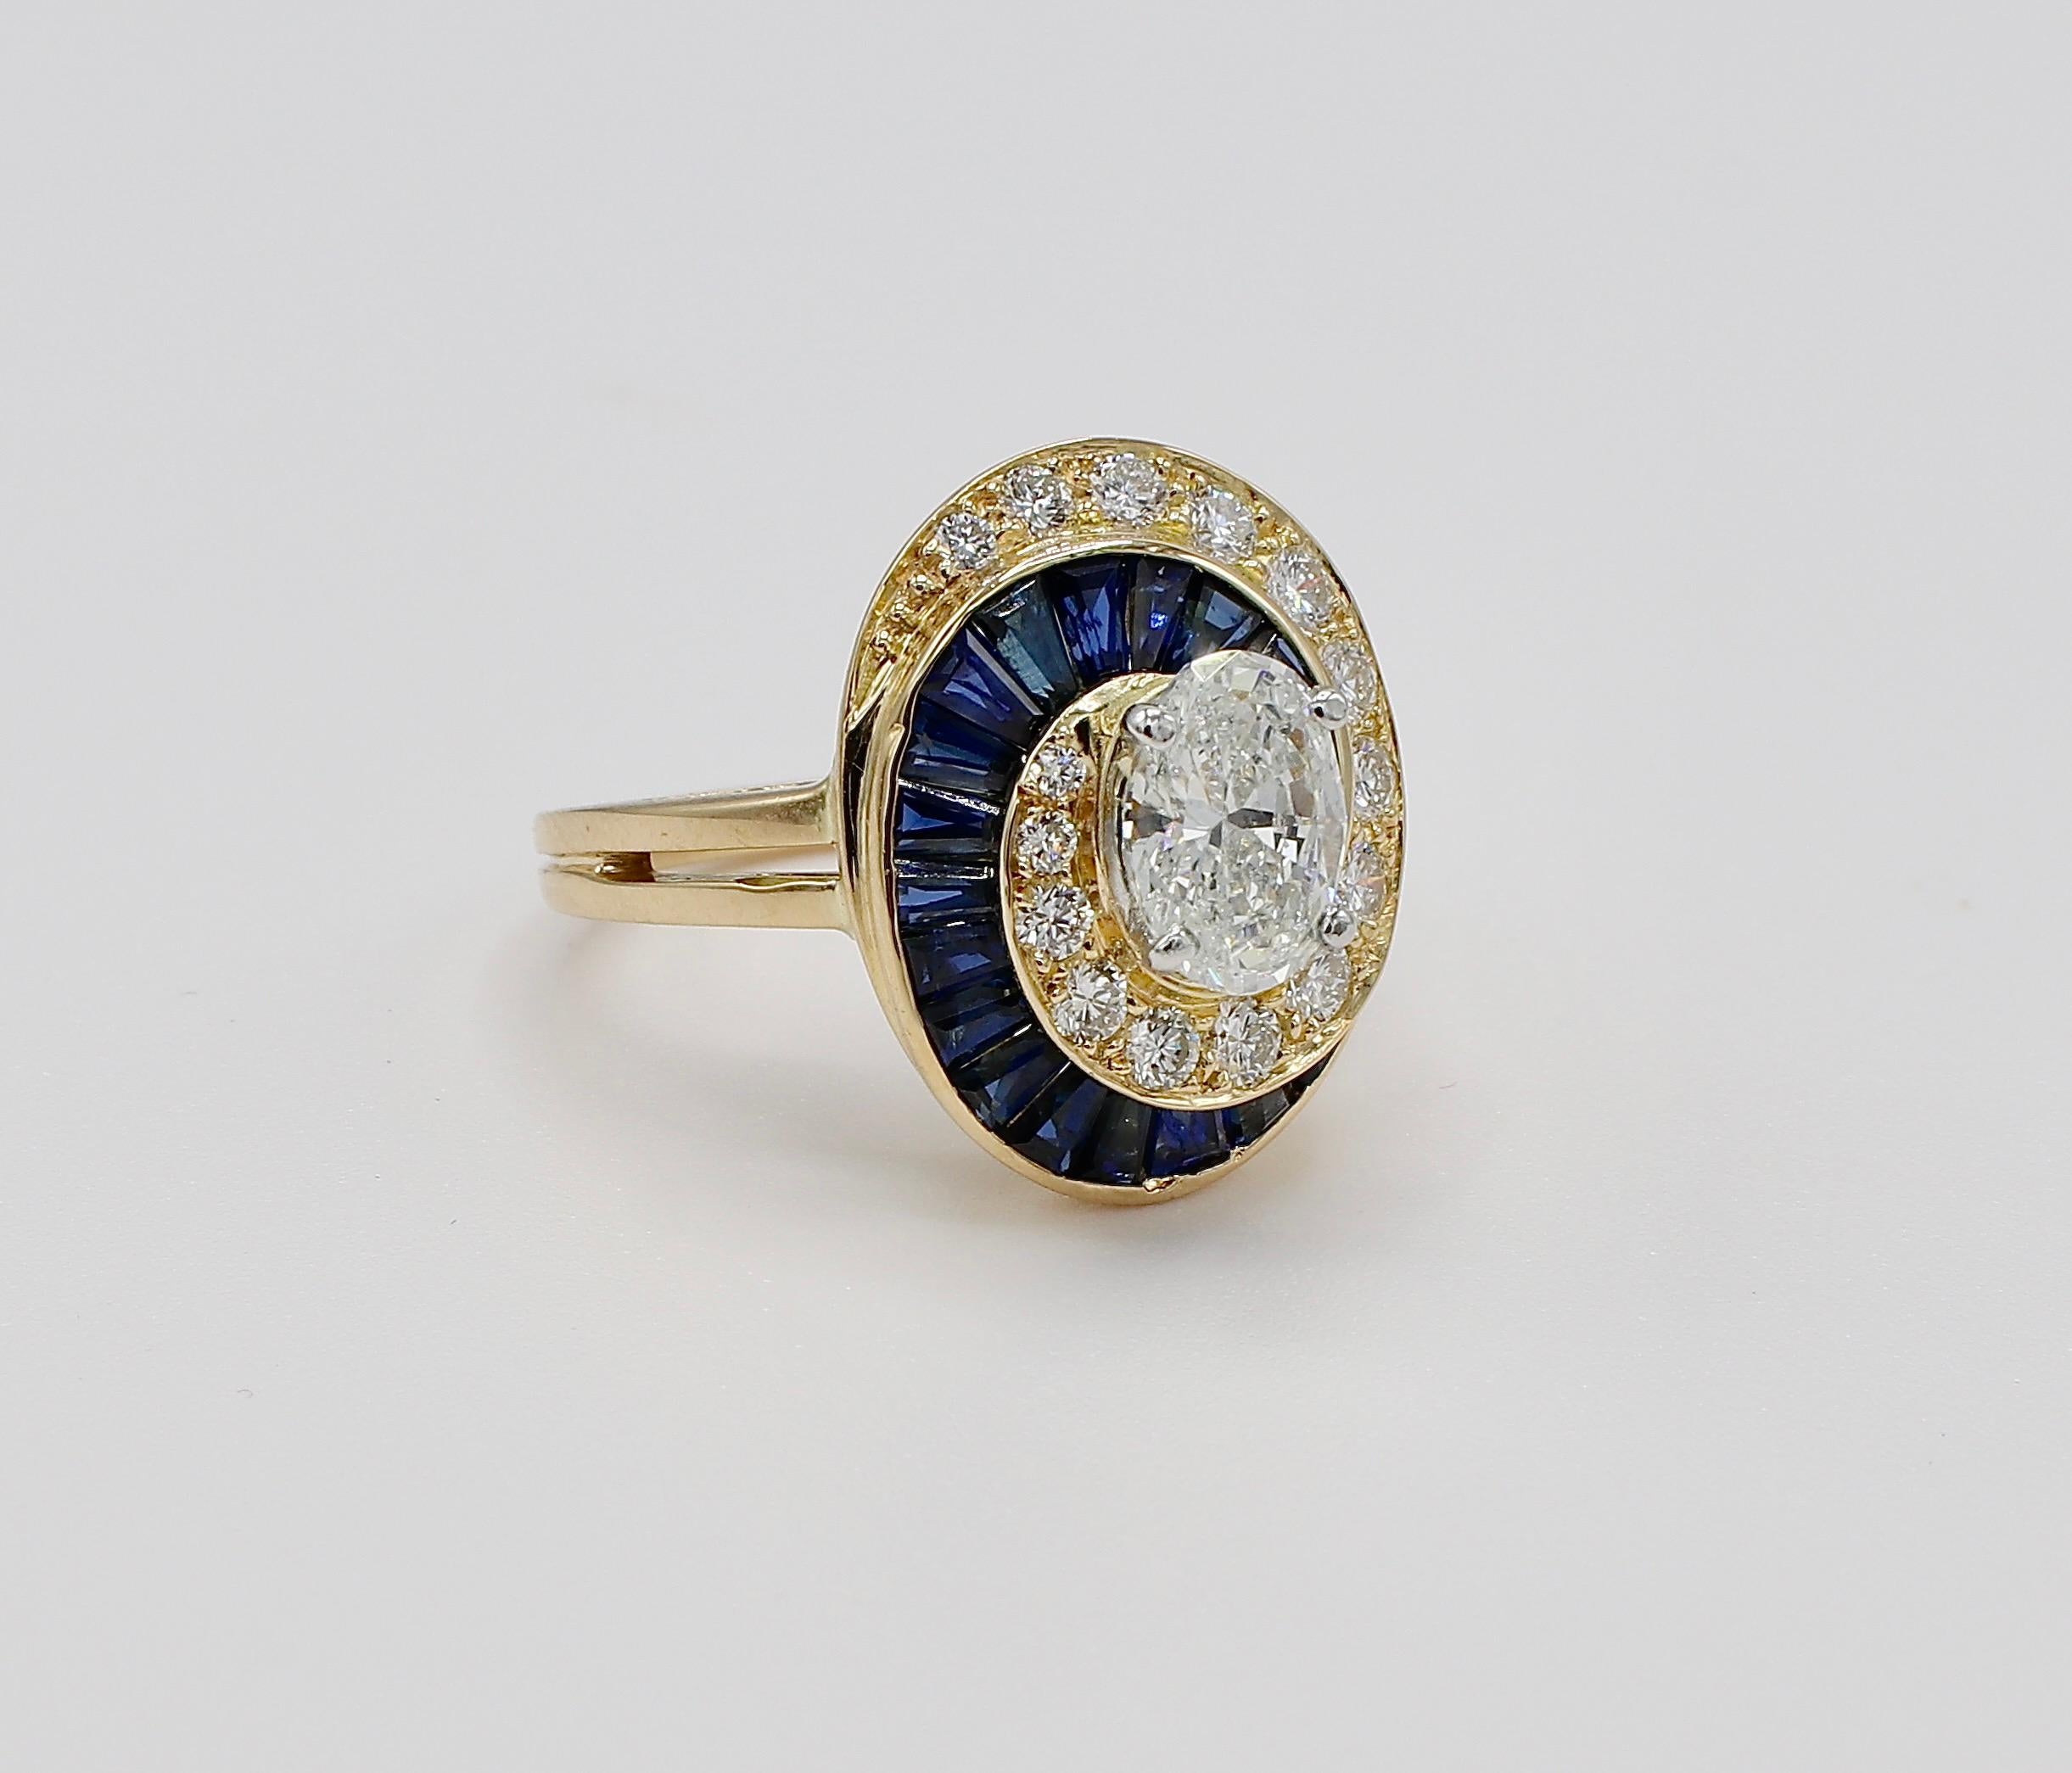 Oscar Heyman Brothers GIA Certified Oval .94 G SI2 Diamond & Blue Sapphire Dome Swirl Cocktail Ring Size 6

GIA Report Number: 5211319912 (note original report pictured for details)
Shape: Oval Brilliant
Carat weight: 0.94 carat
Color: G
Clarity: